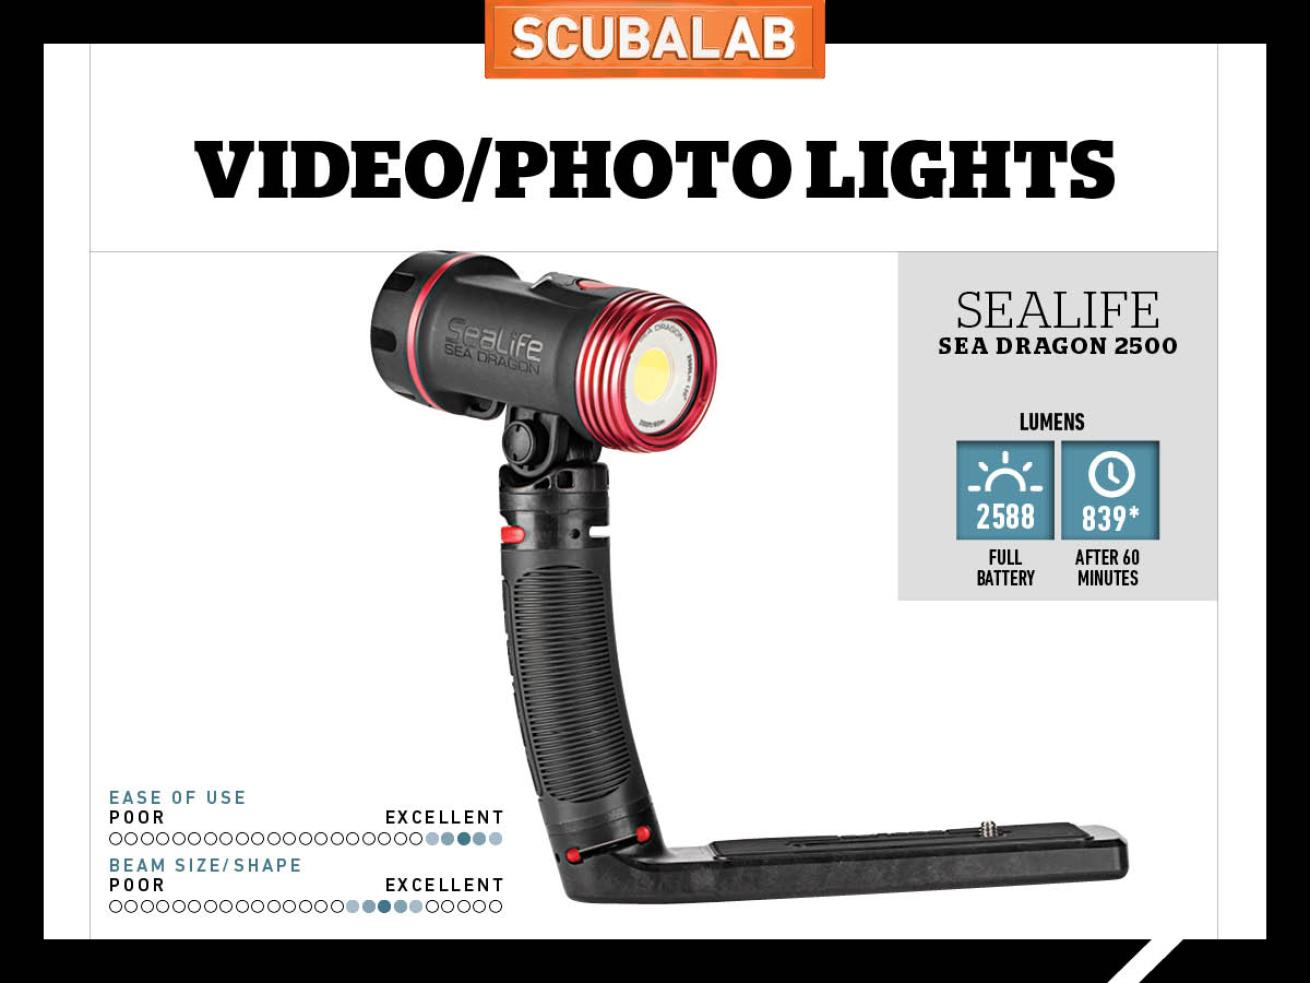 SeaLife Sea Dragon 2500 Underwater Video Light Reviewed by ScubaLab